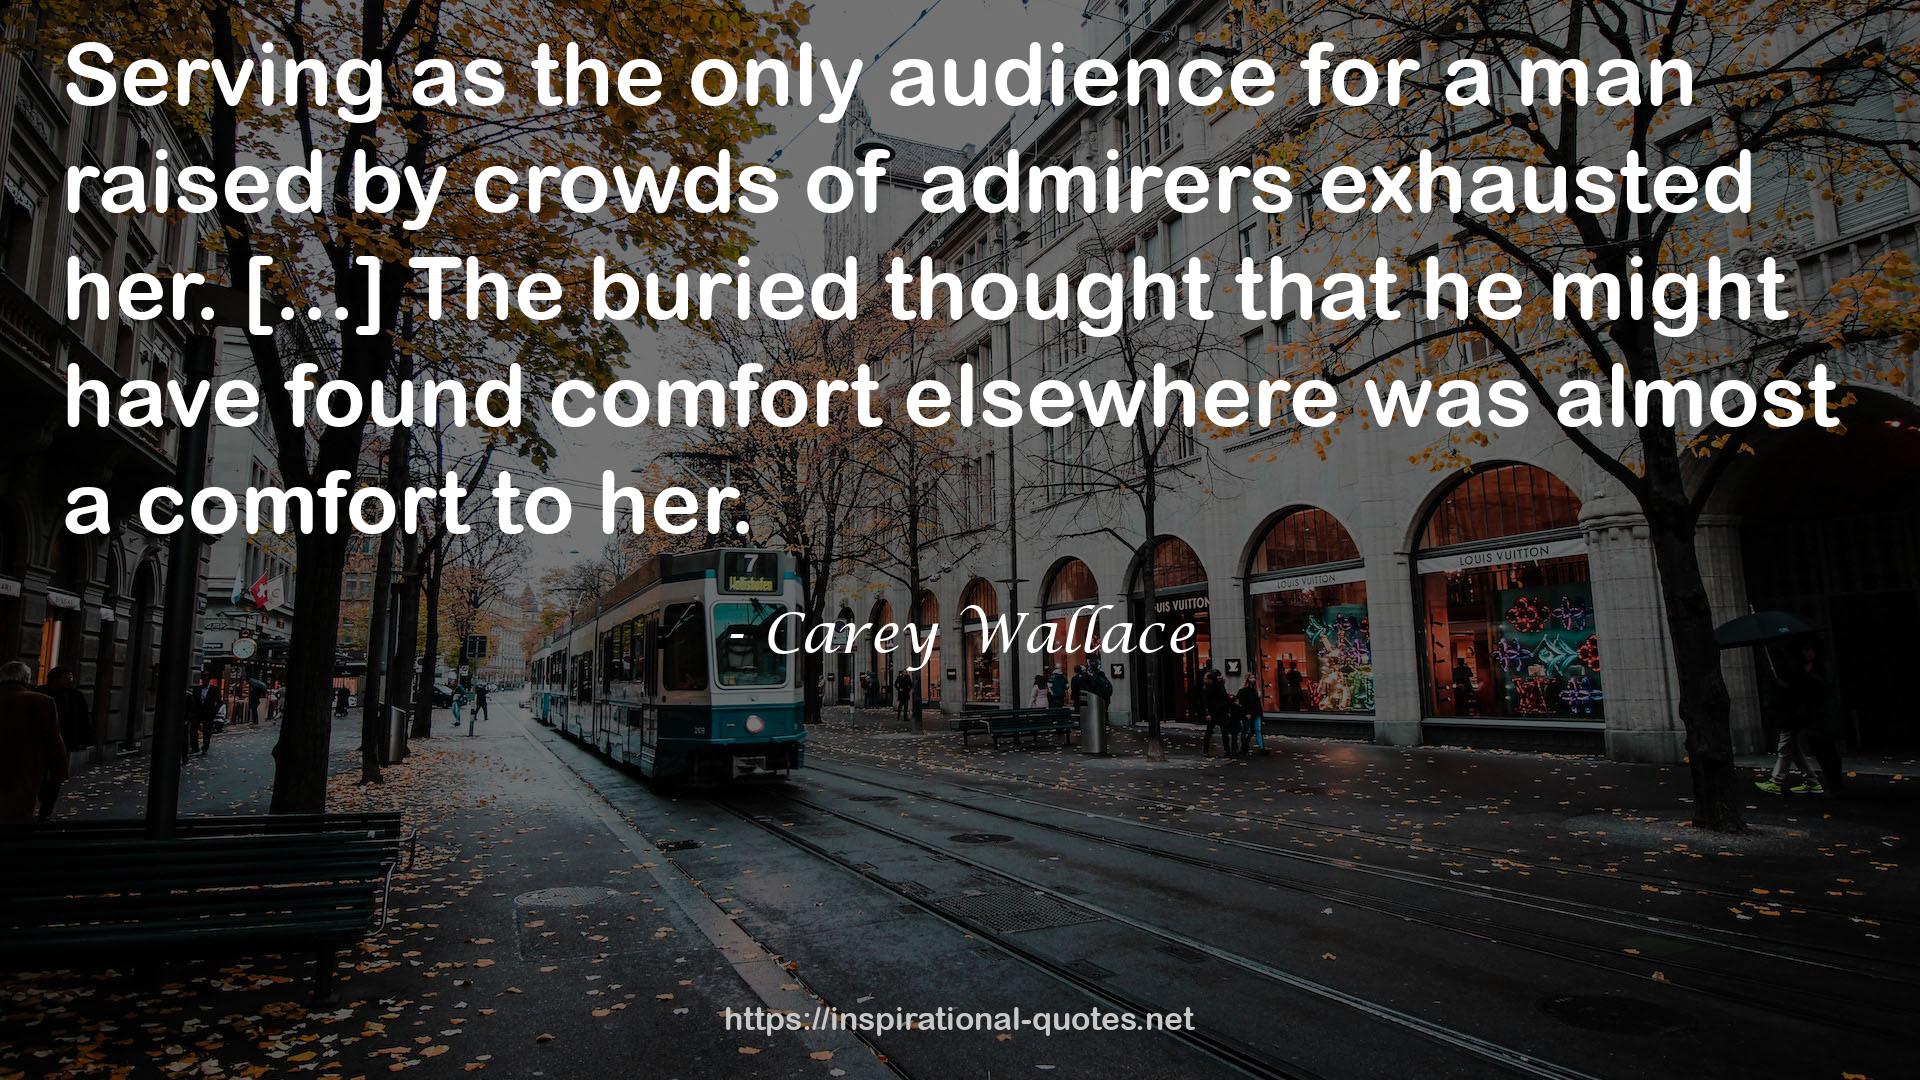 Carey Wallace QUOTES